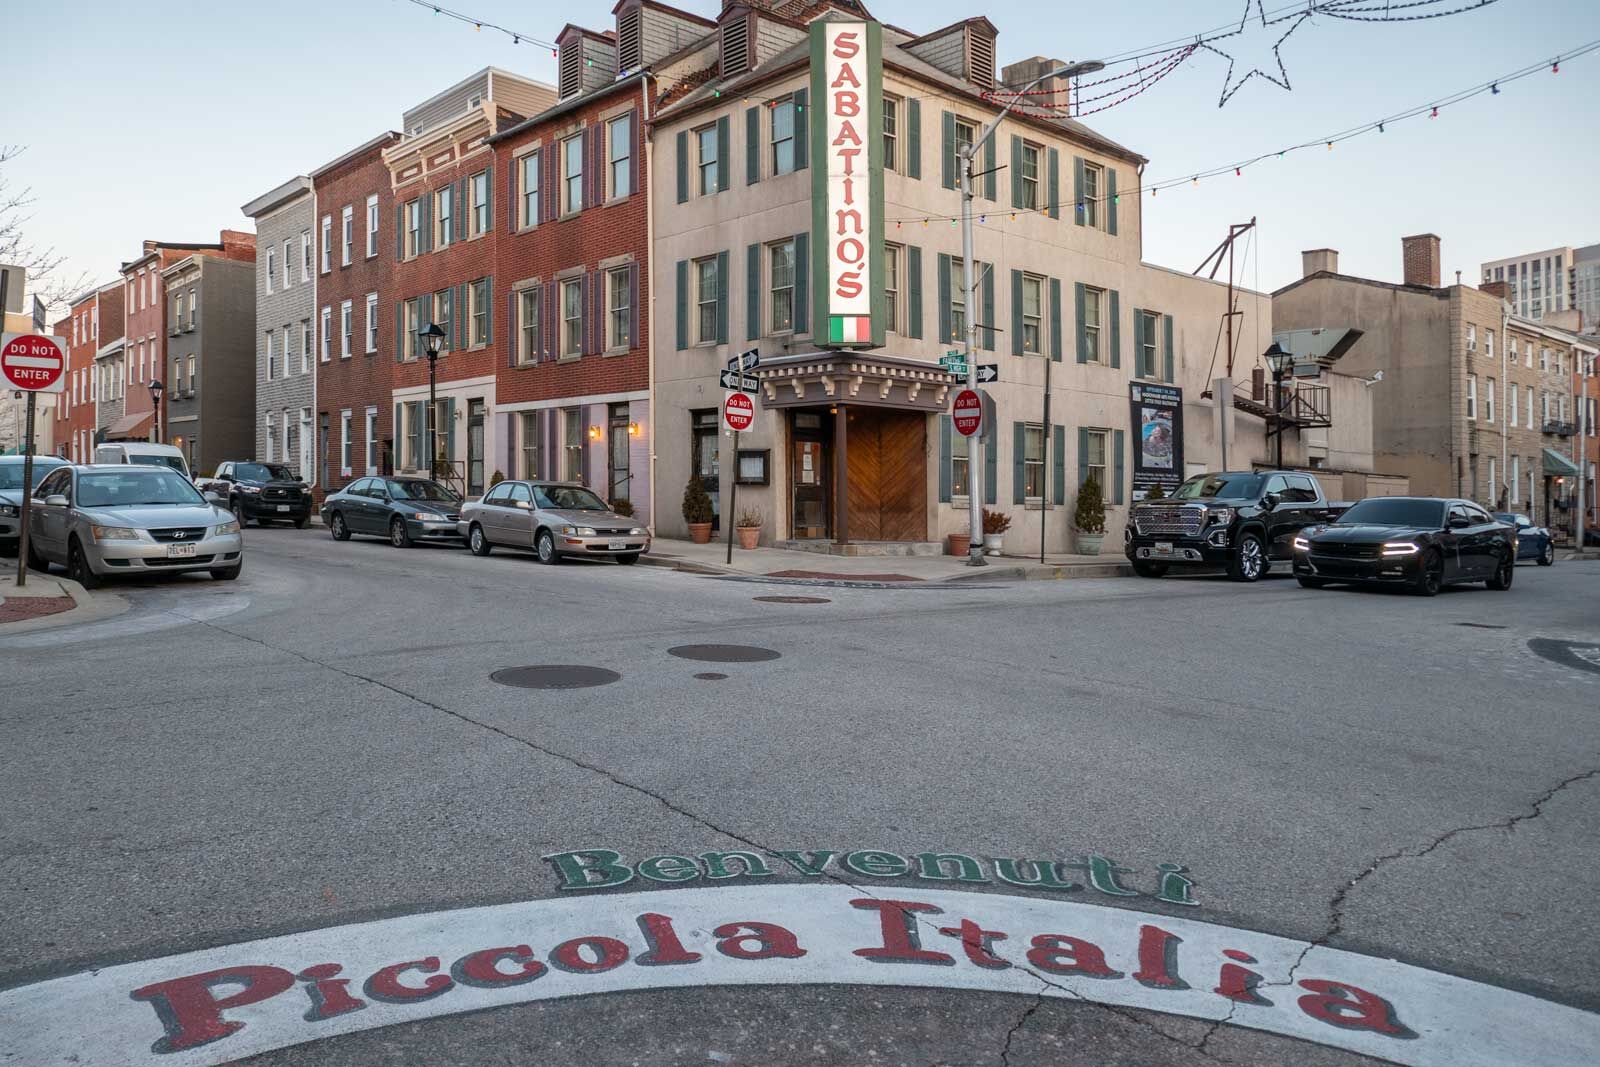 view of Sabatino's from the street with a mural painted in the street that says welcome to little italy